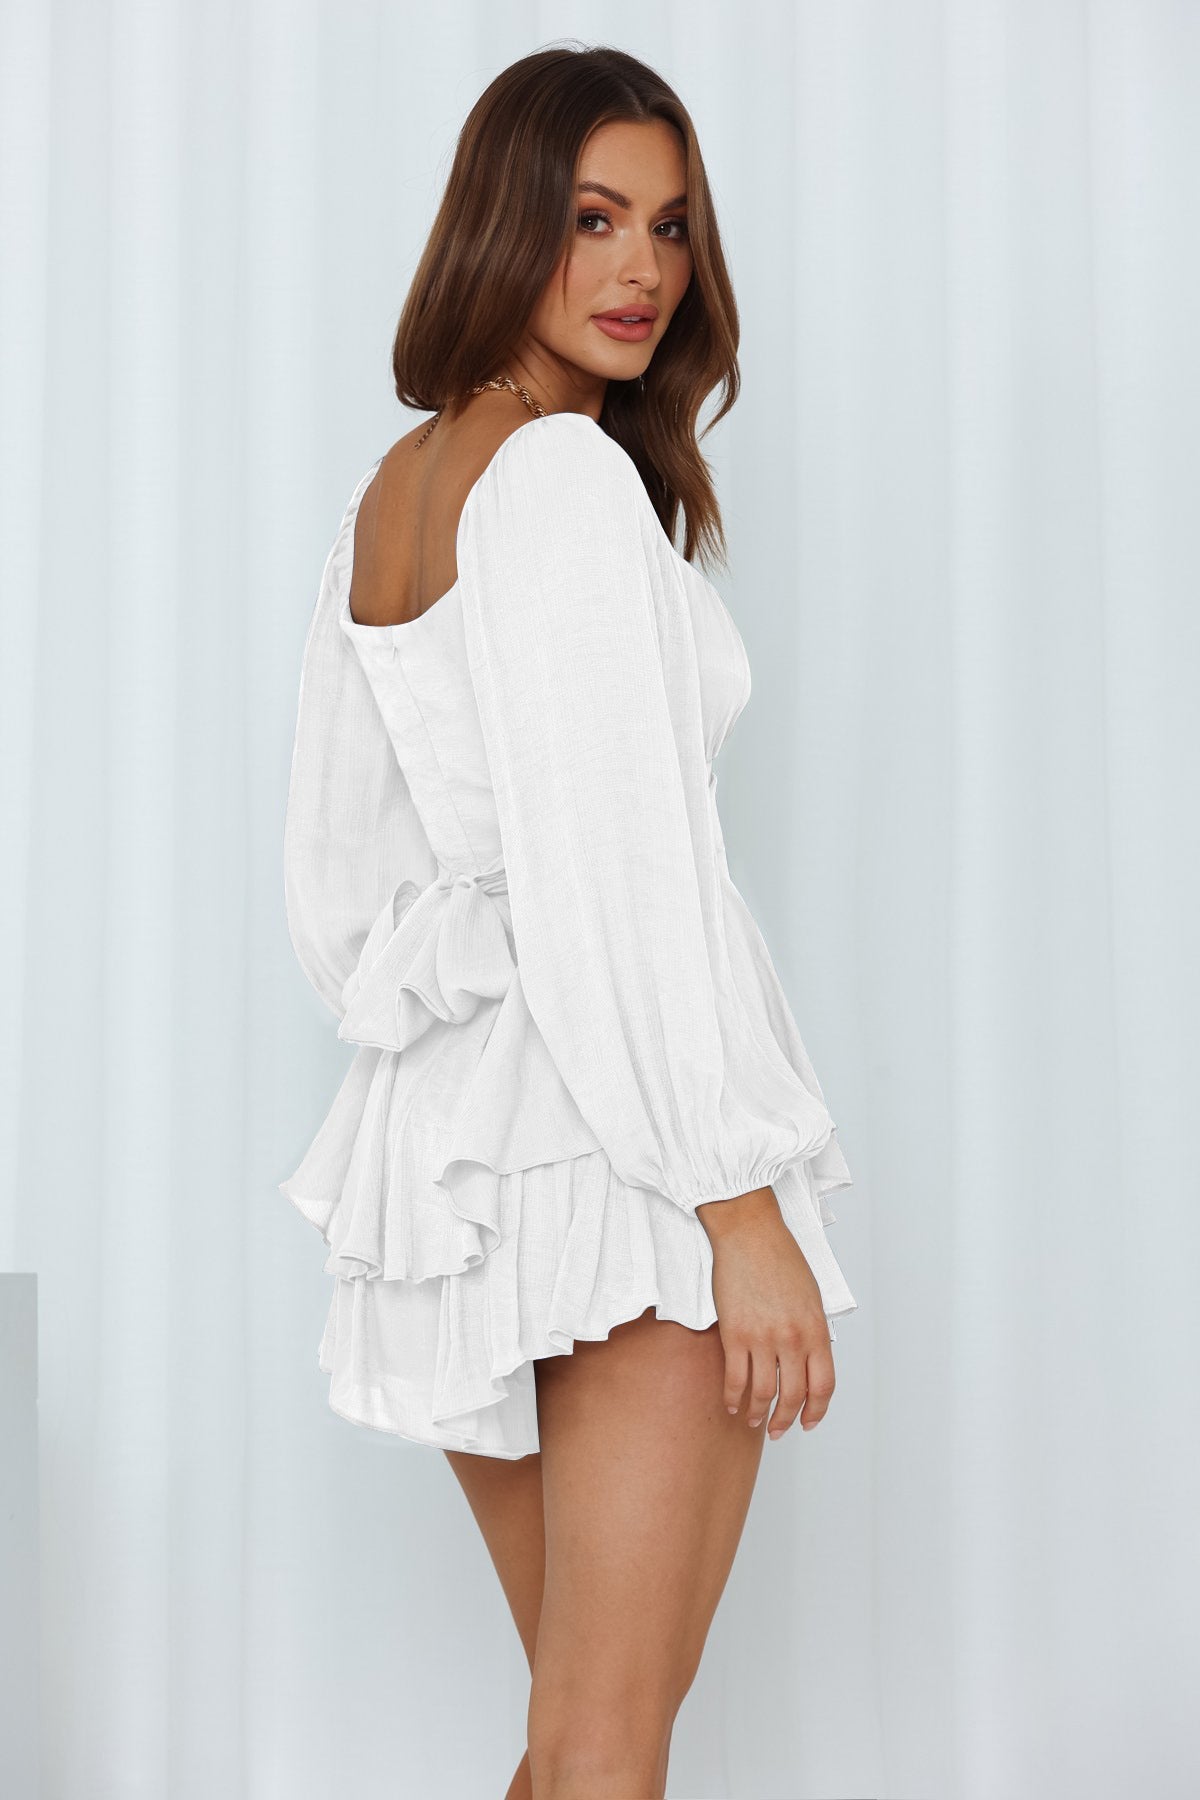 Discover the allure of rompers with our Belle Romper collection. Elevate your wardrobe with this stylish and comfortable romper.